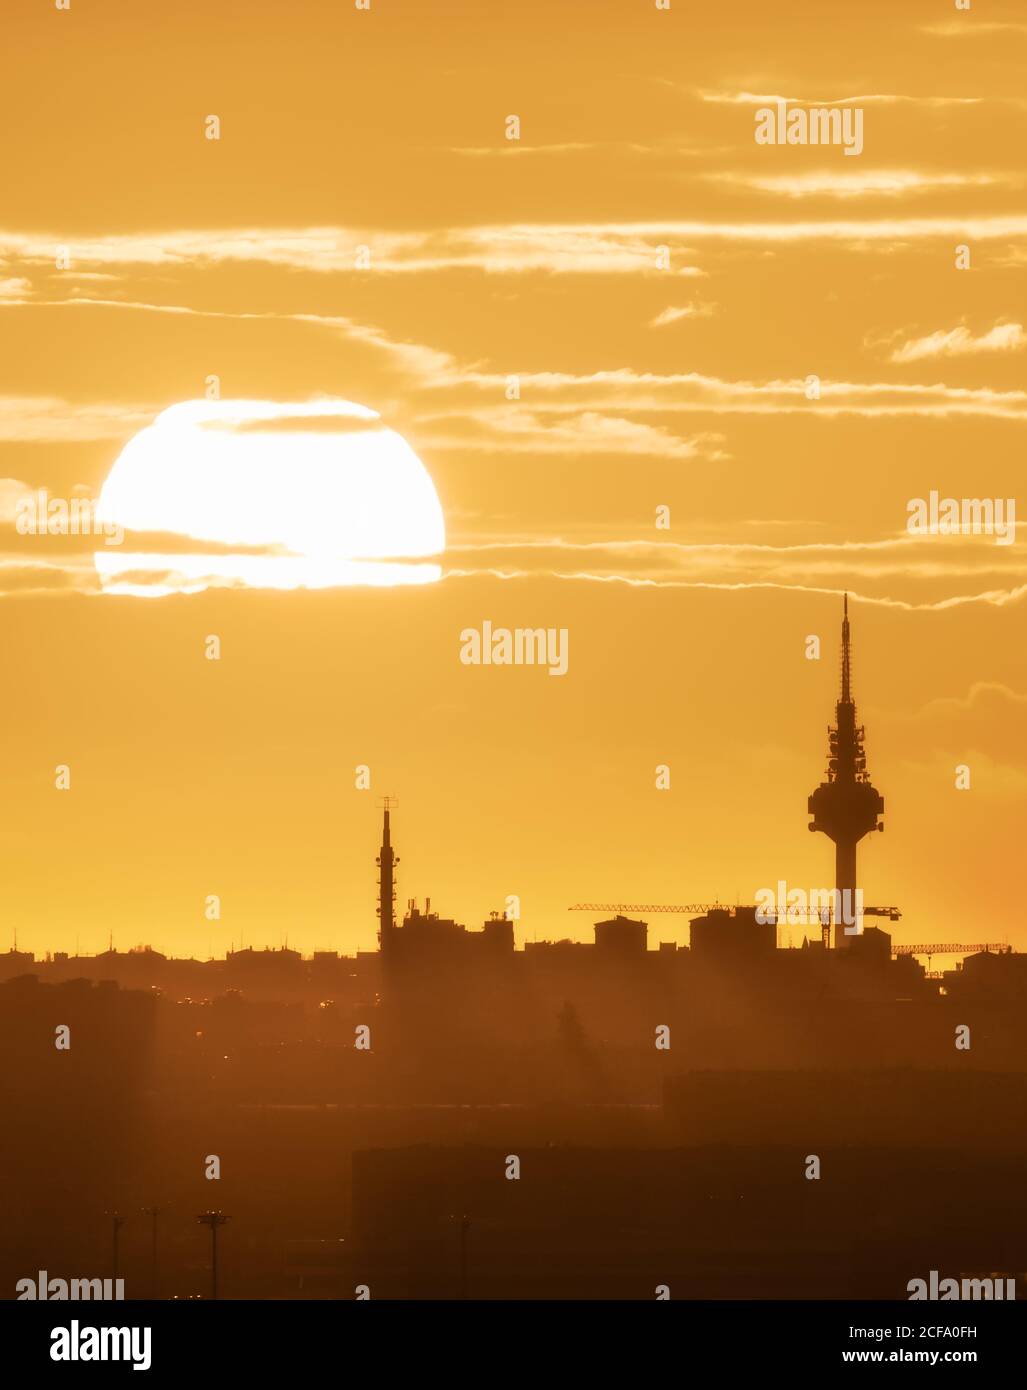 Magnificent cityscape with silhouettes of buildings on background of bright sun and amazing sundown Stock Photo